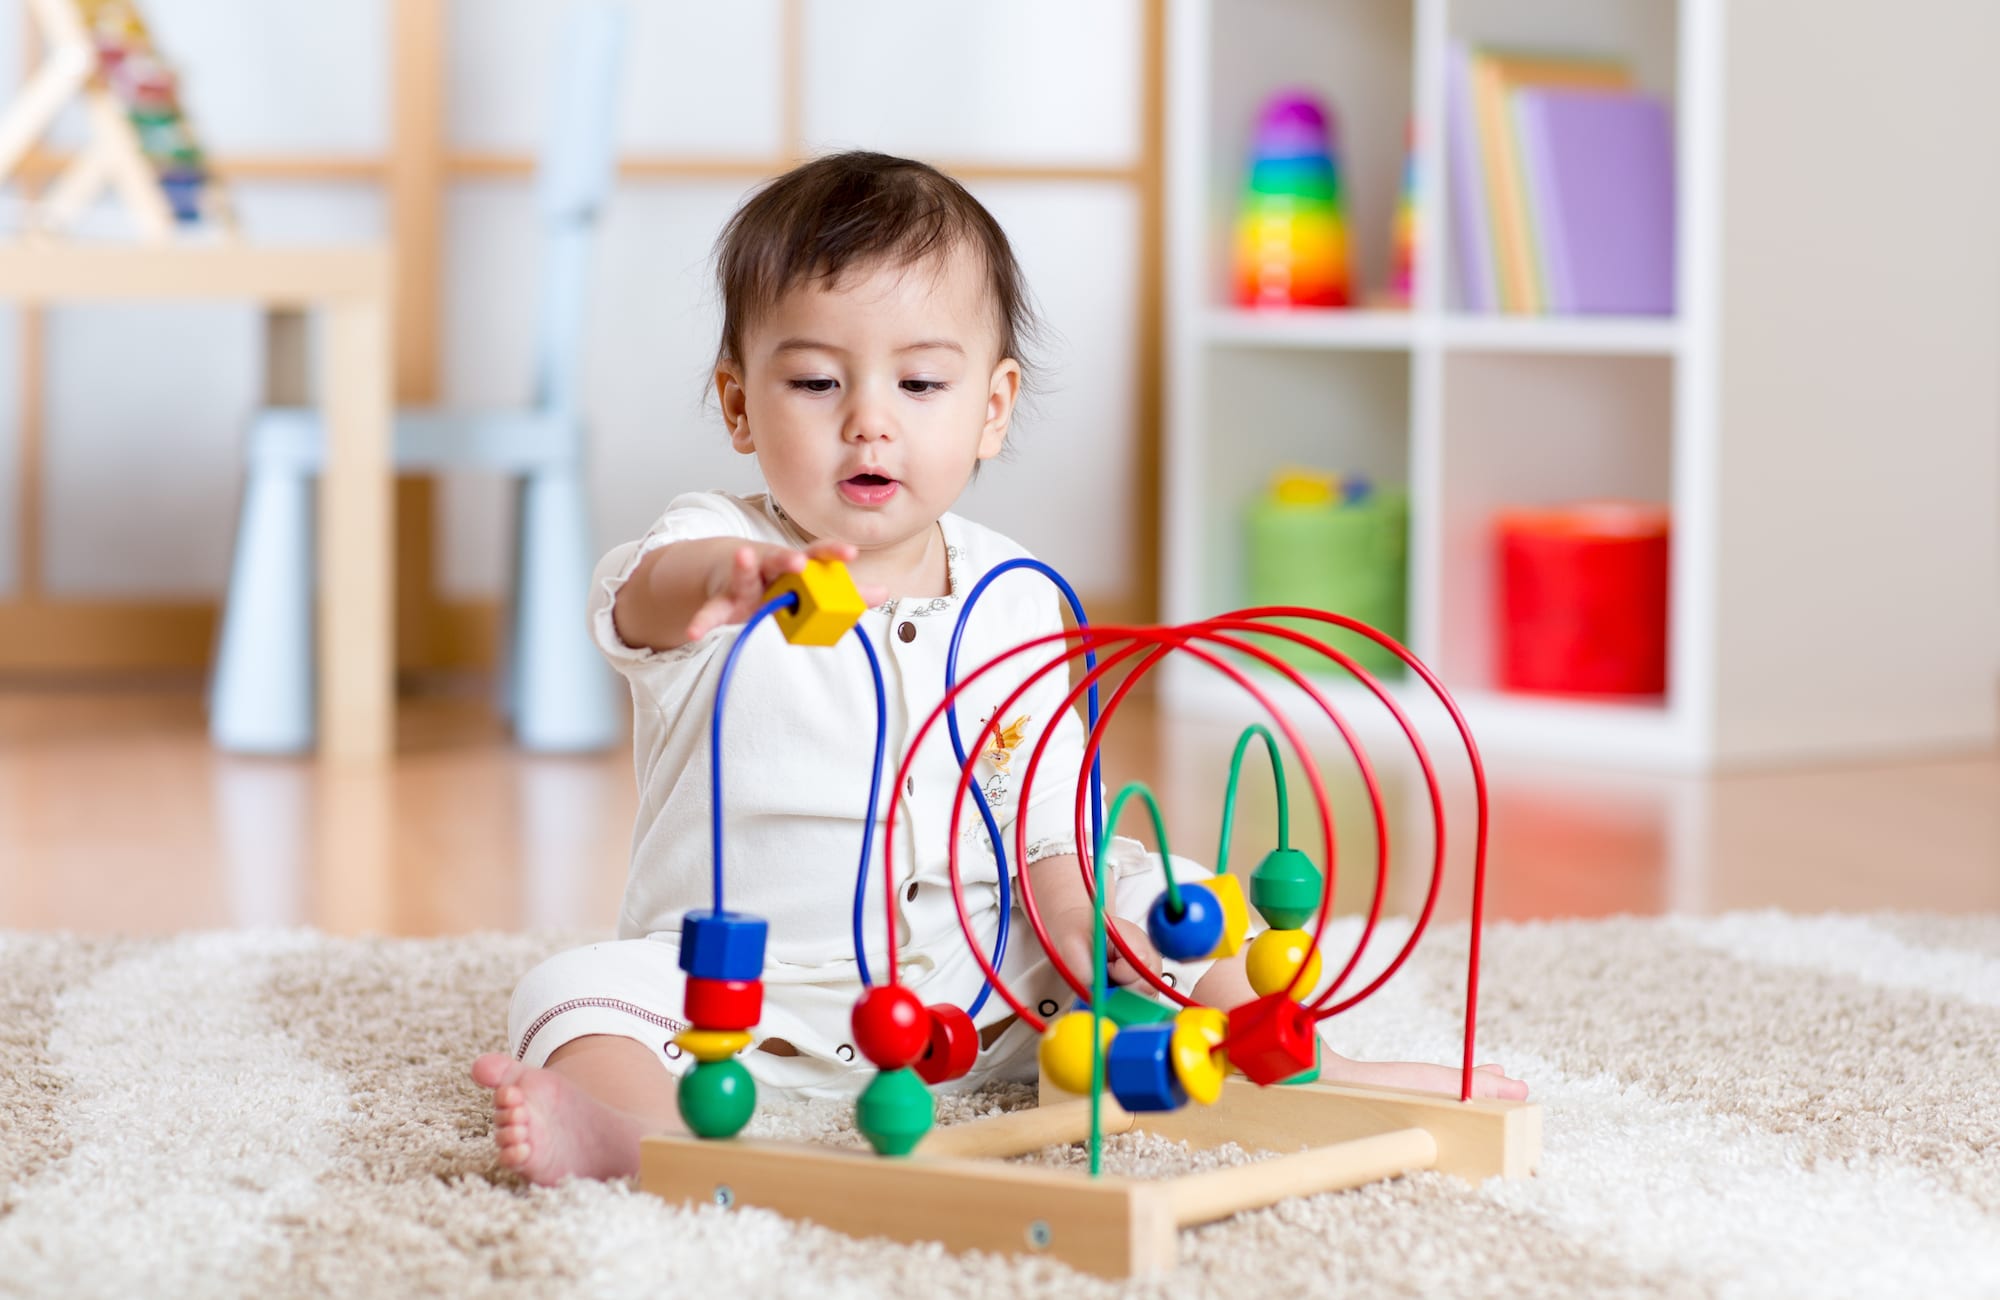 Baby Toys Good For Development: How to Choose the Best Toys for Your Little One